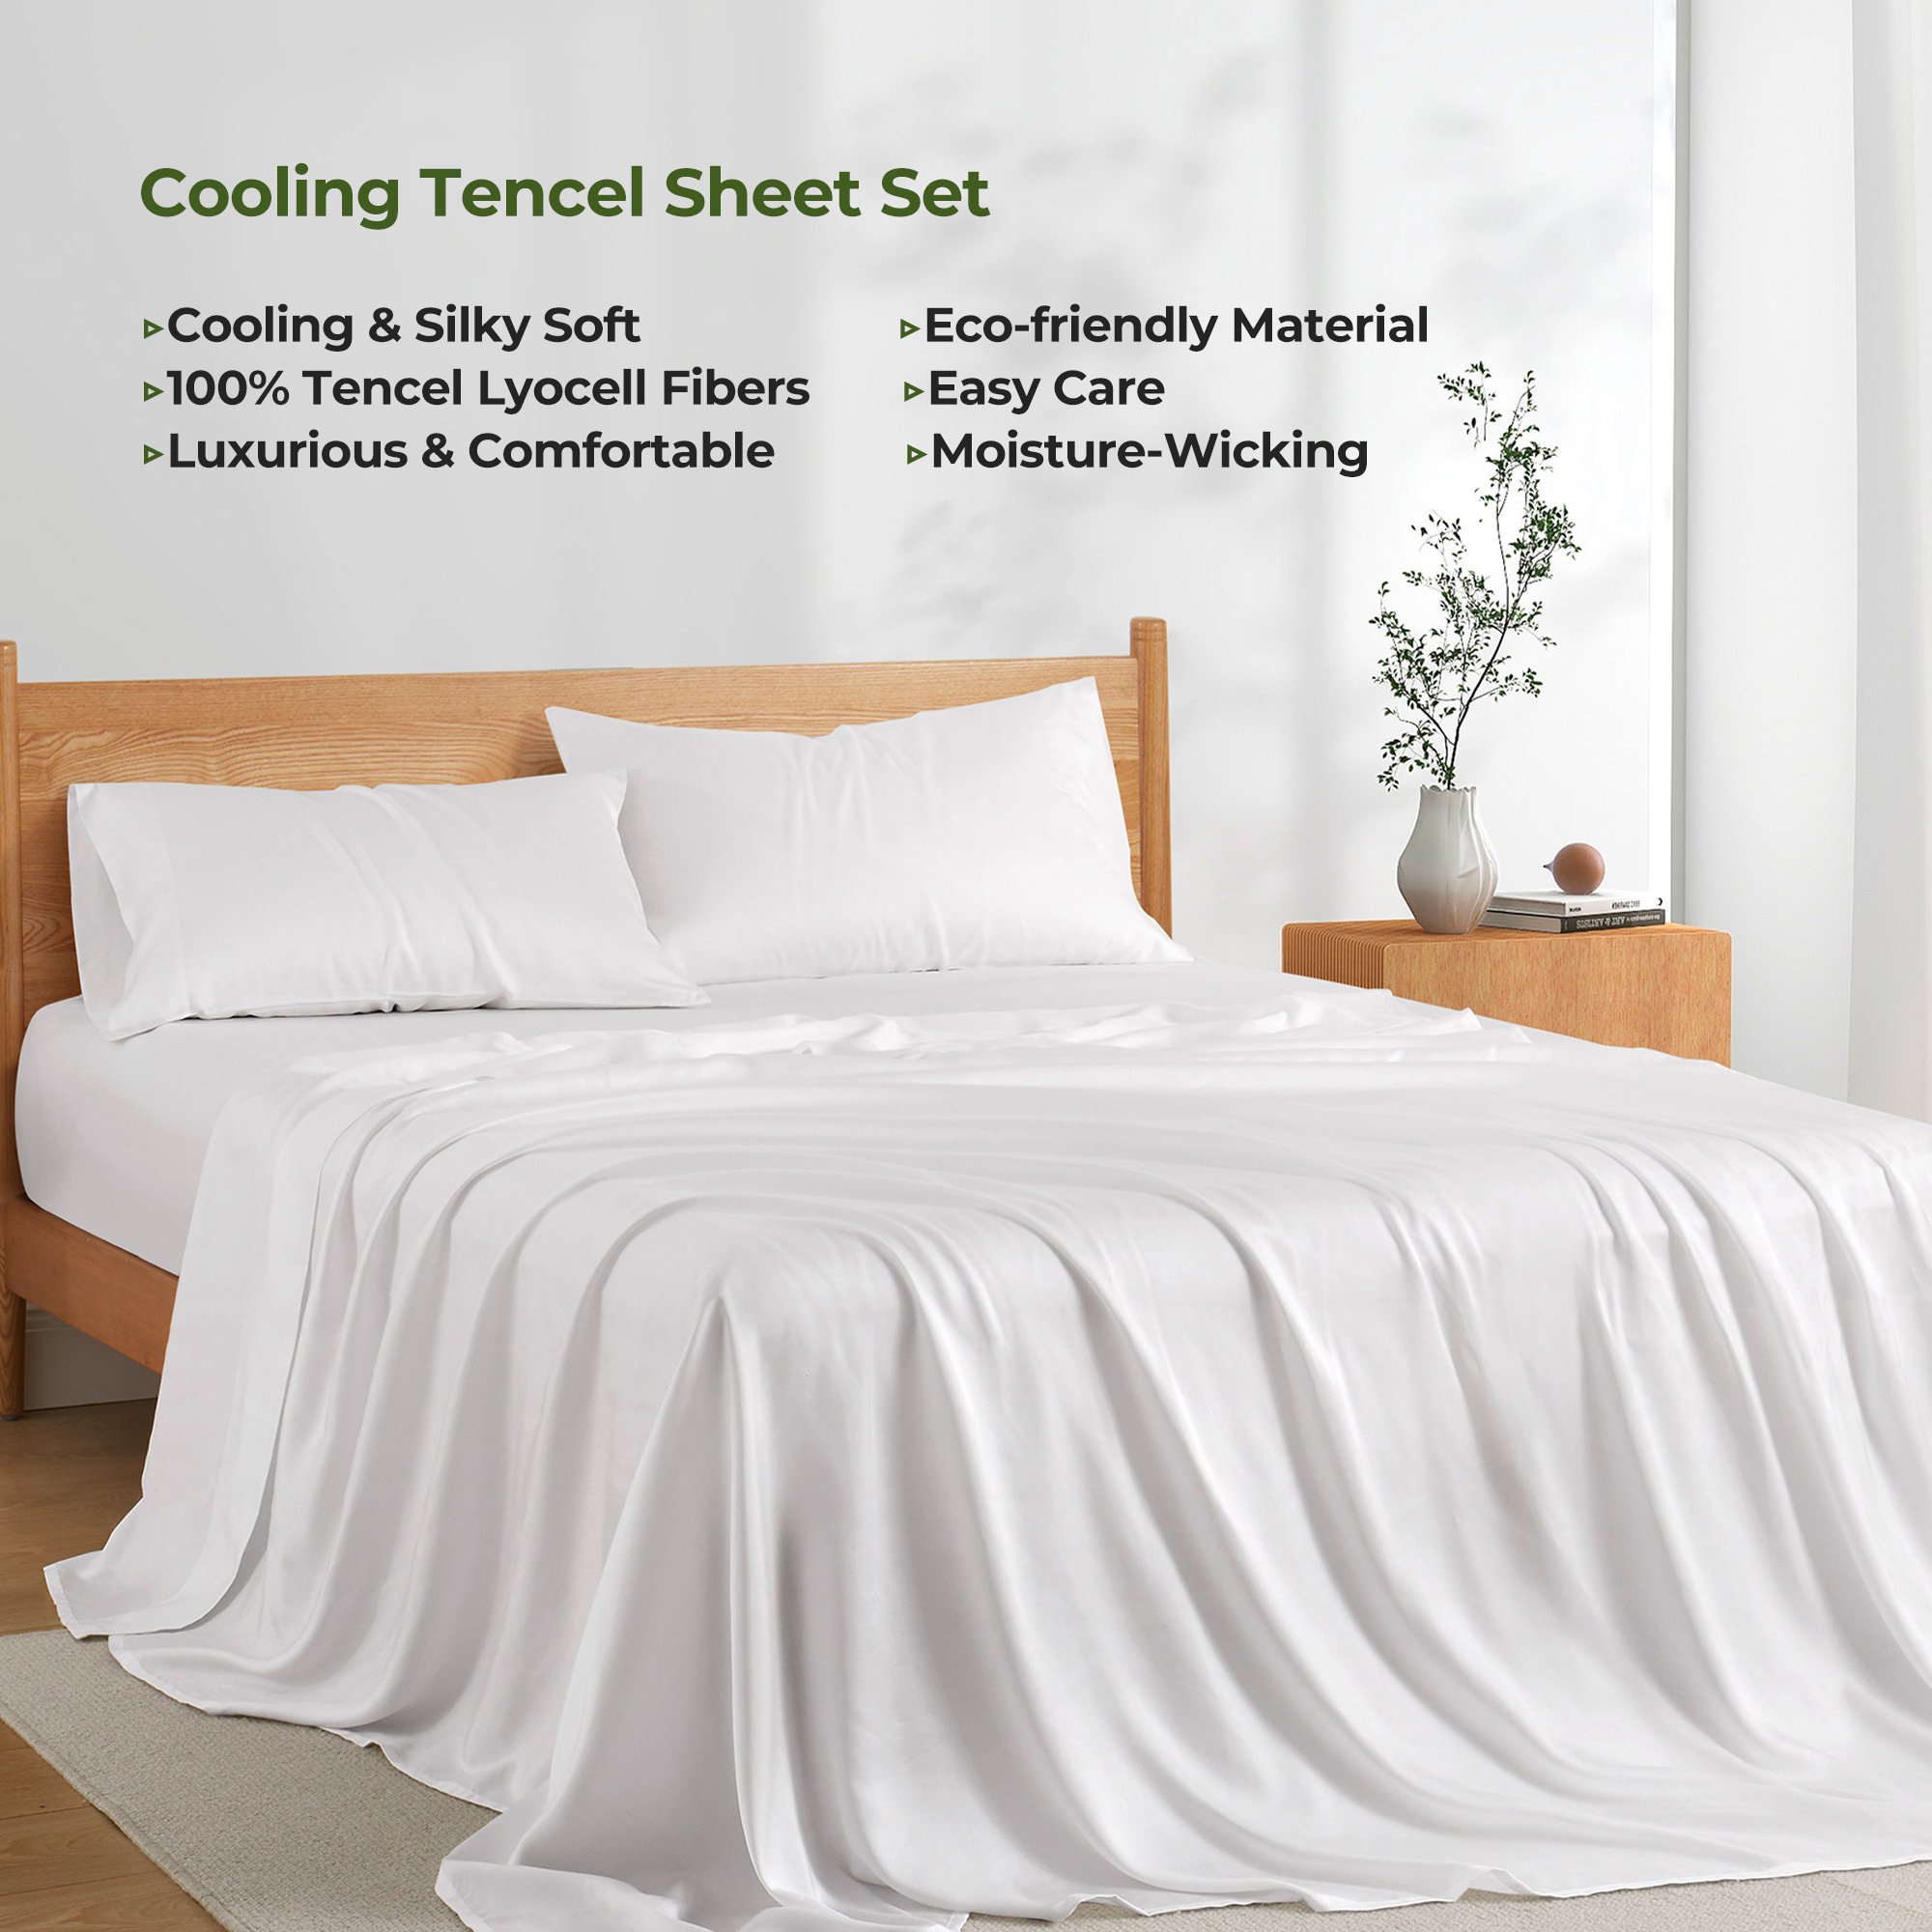 Tencel Lyocell 4Pc Sheets Set, Softest & Cooling-Deep Pocket Bottom Bed Sheet, Large Top Sheet & Pillowcases - Twin Size